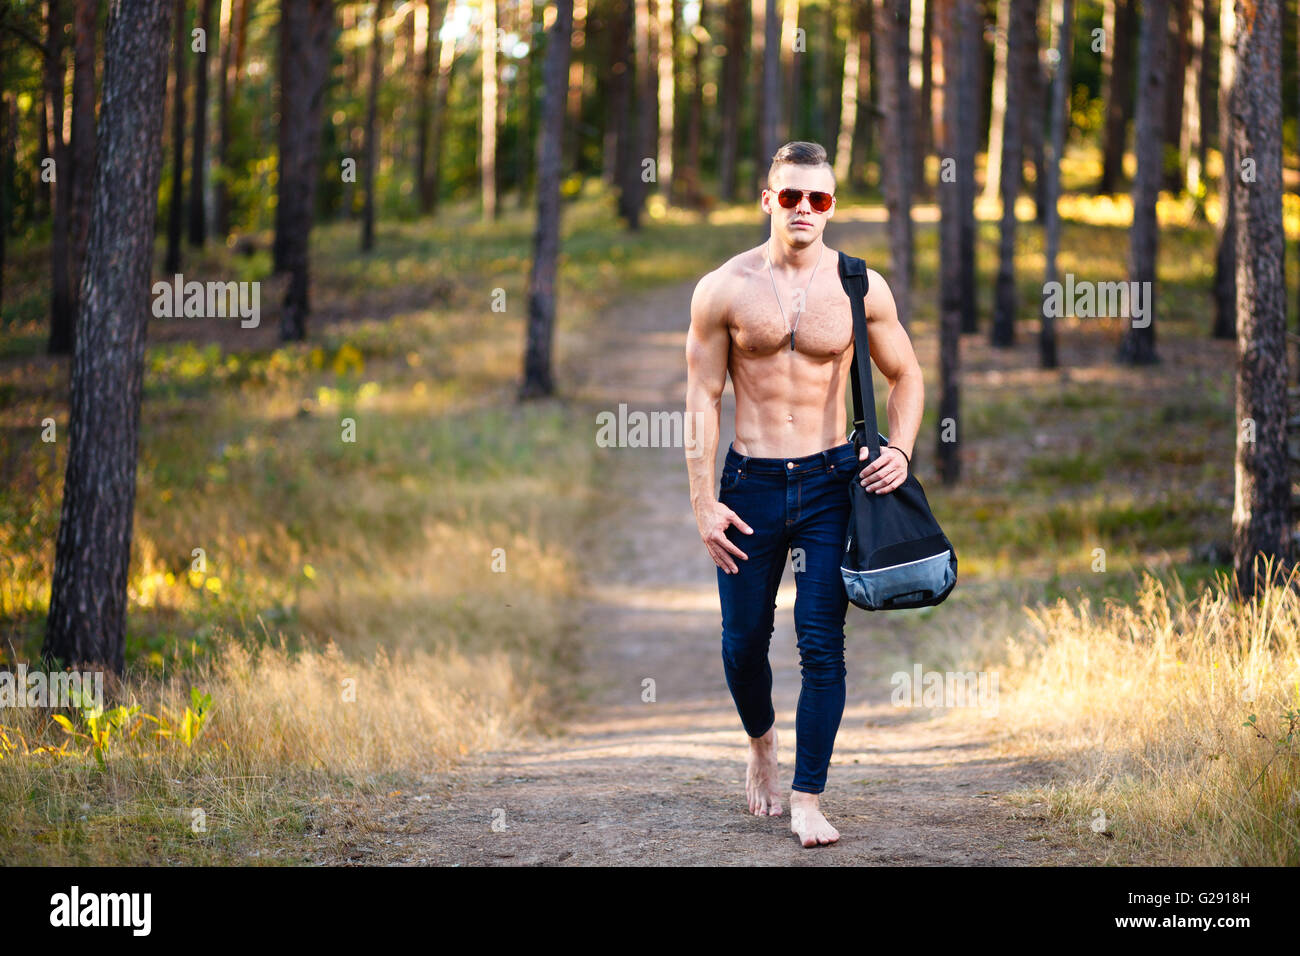 Muscular young man with bag in a forest. Stock Photo